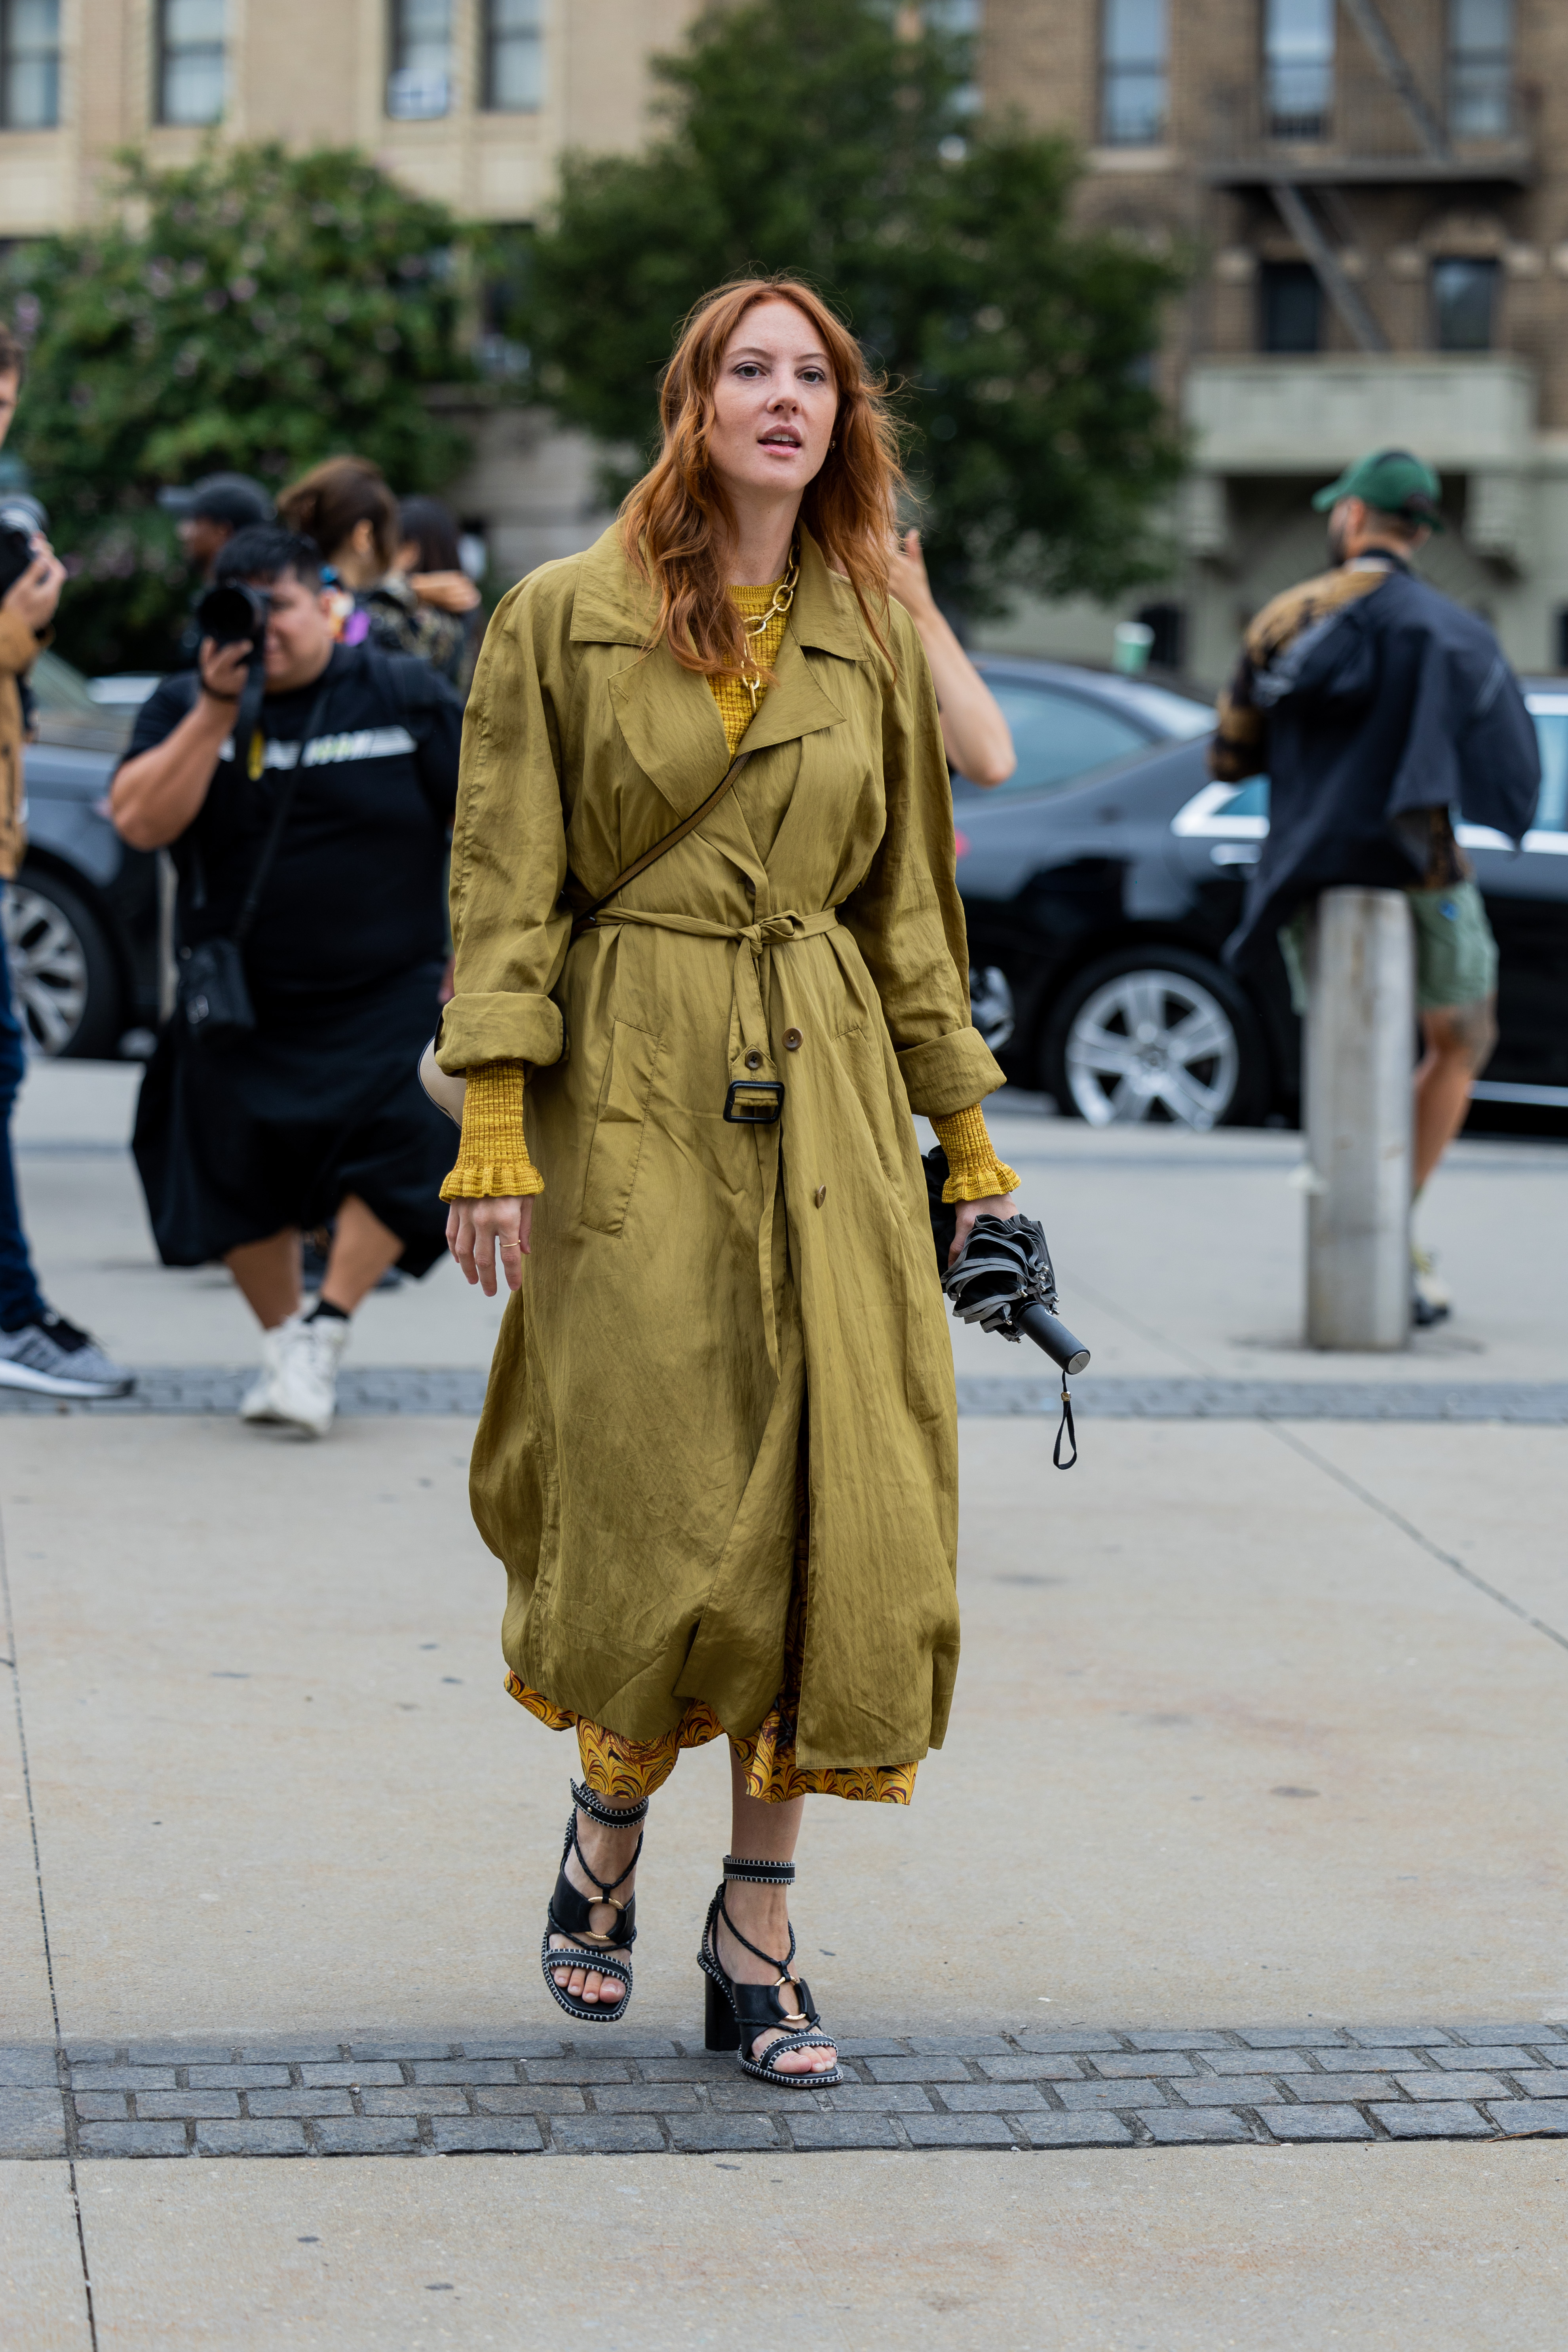 All Of The Best Street Style From New York Fashion Week So Far - Grazia